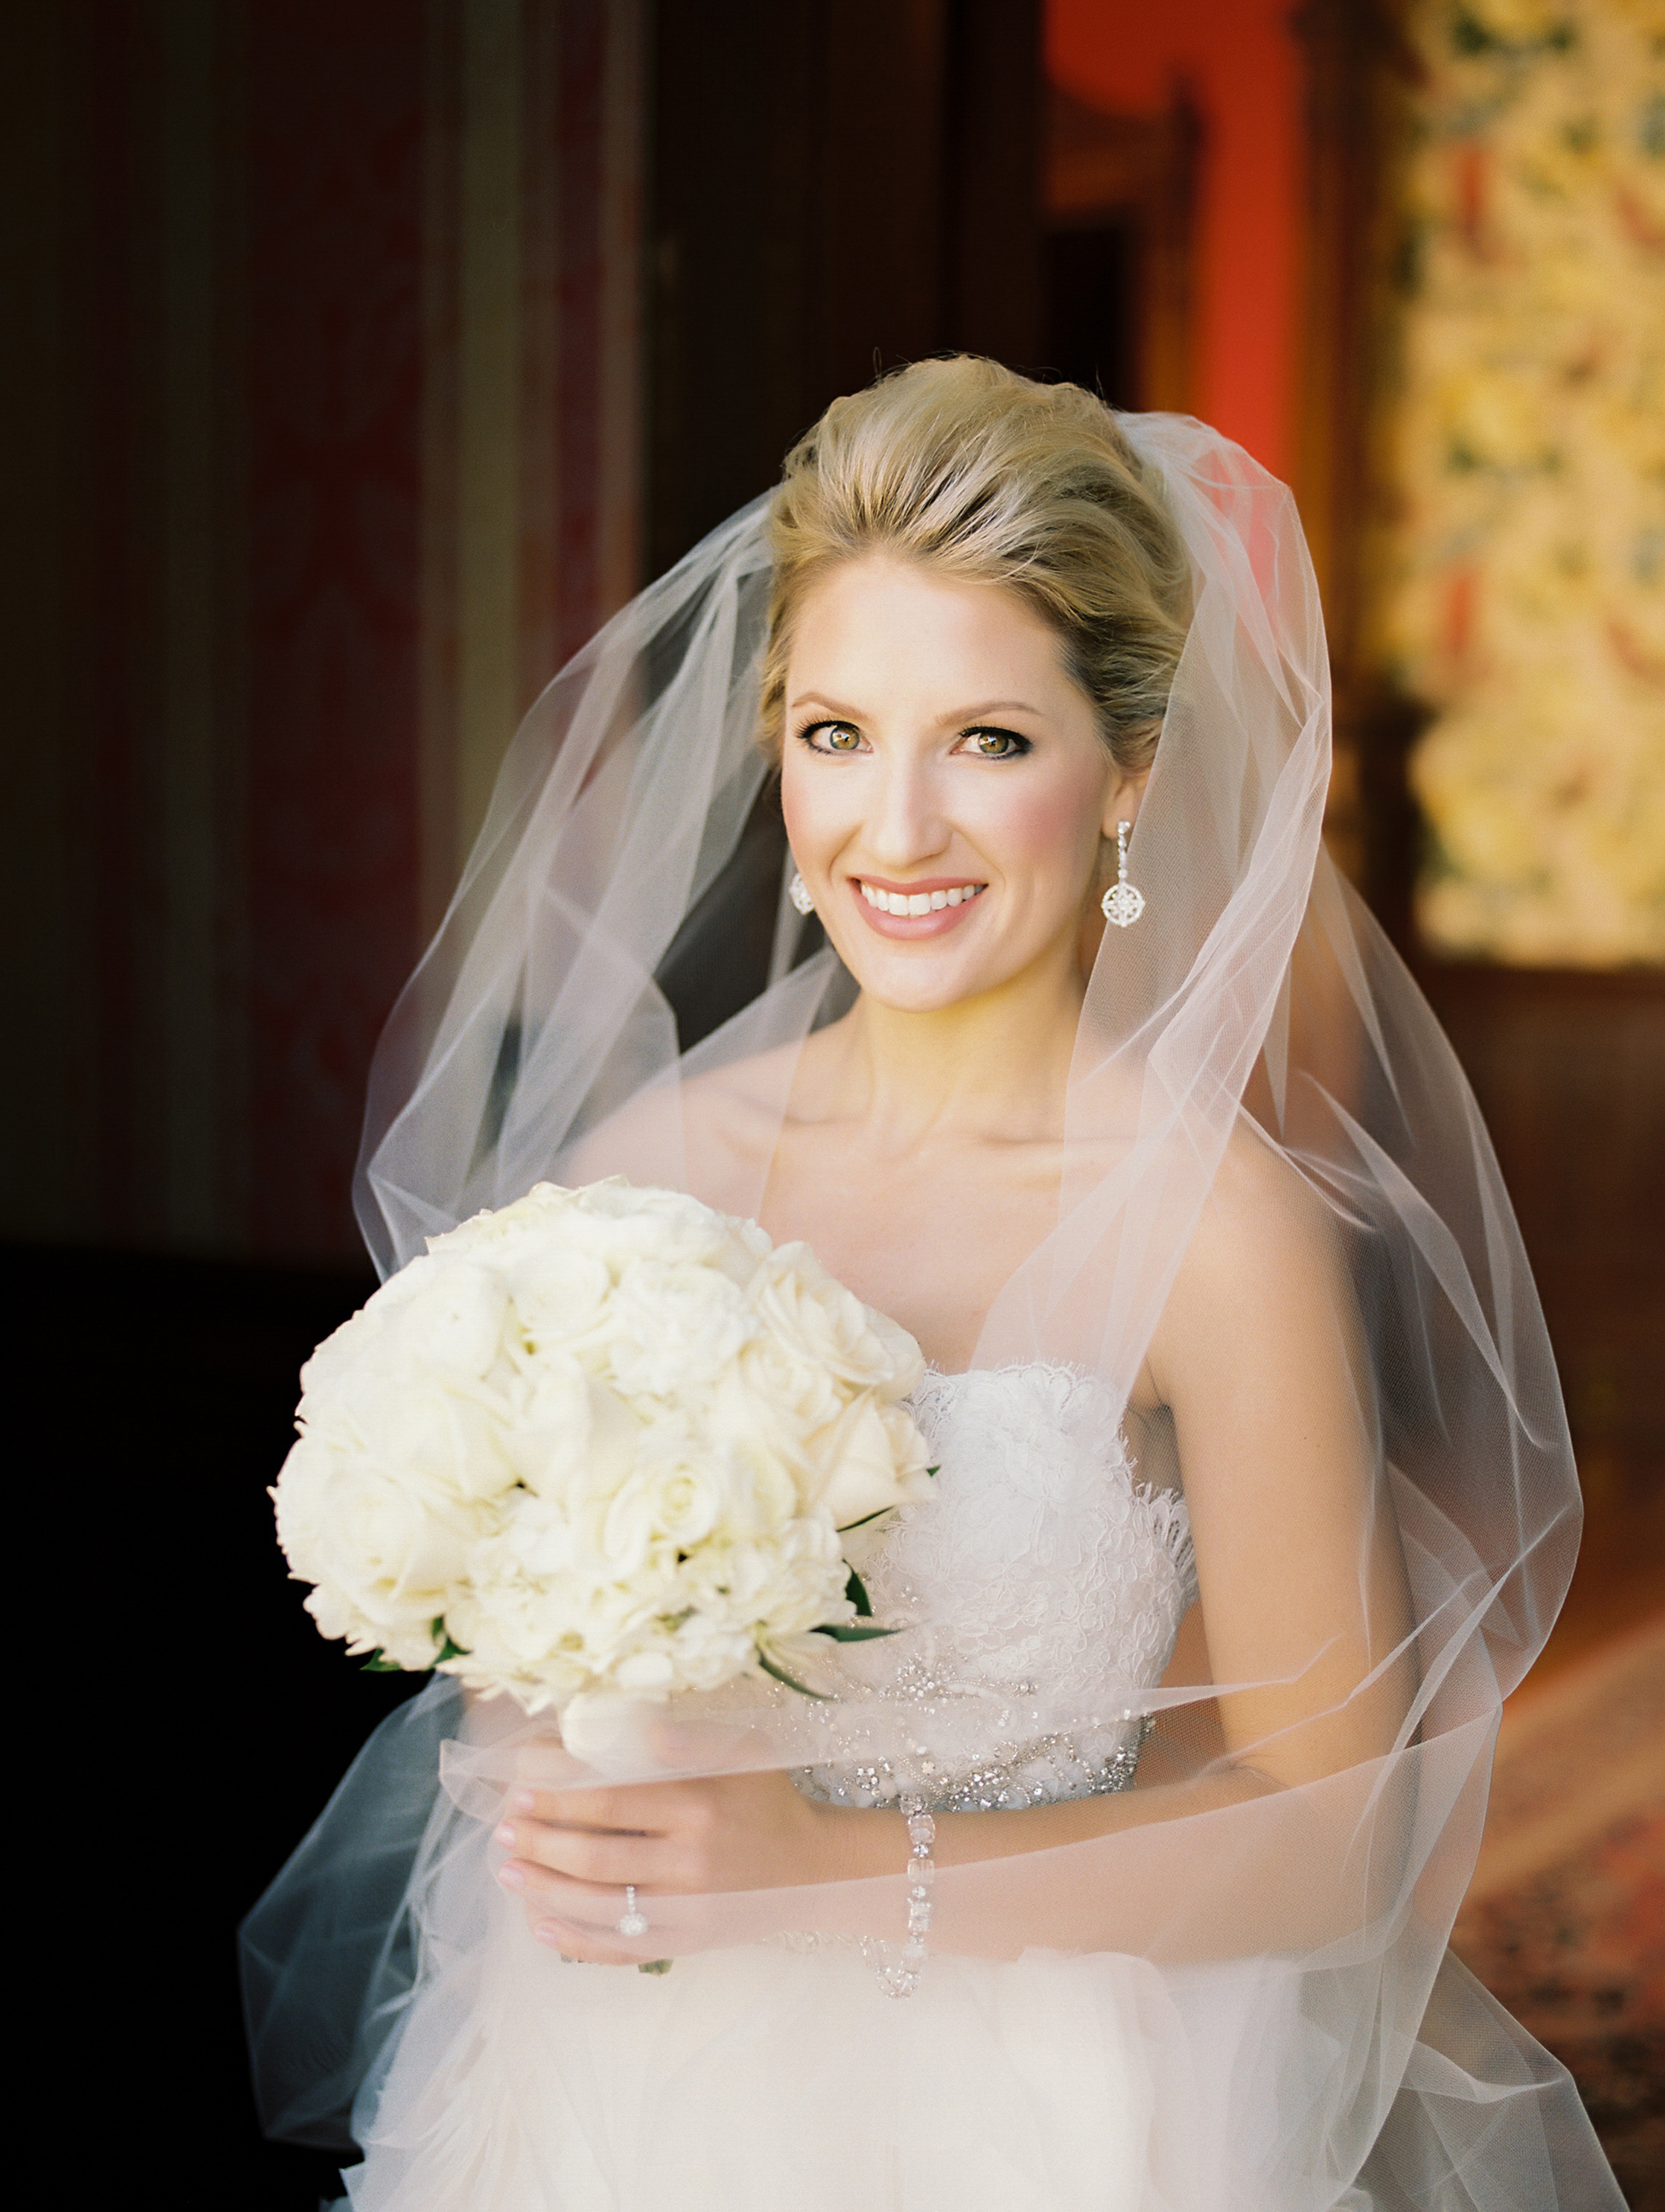 southern wedding traditions bride smiling photo